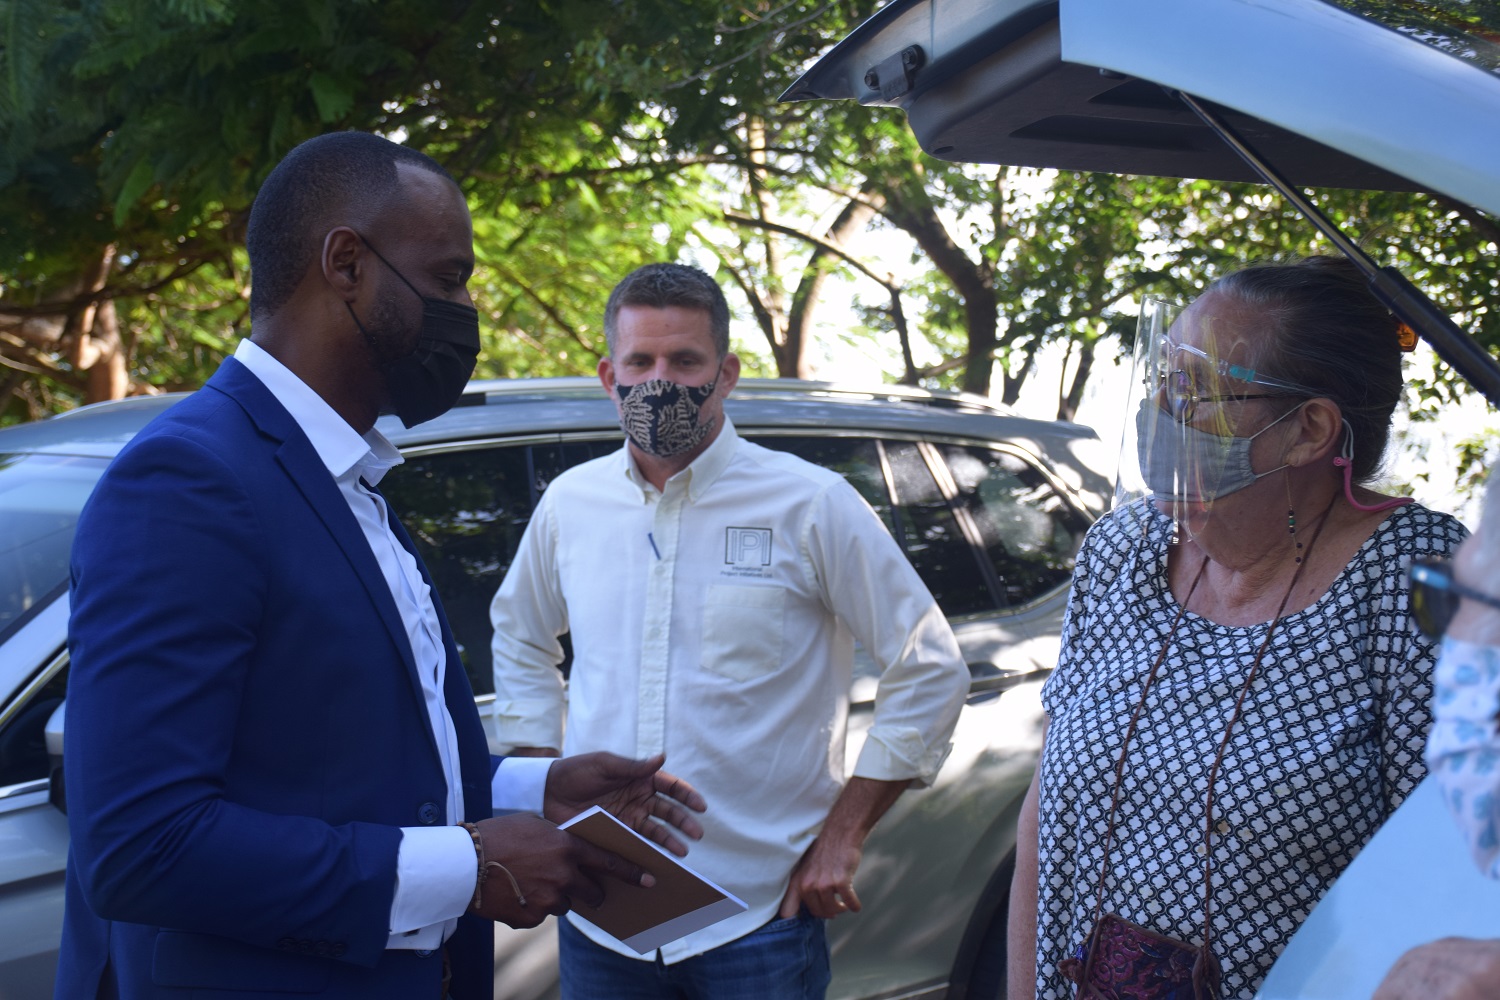 Utilities Minister addresses water woes with St. Ann’s residents